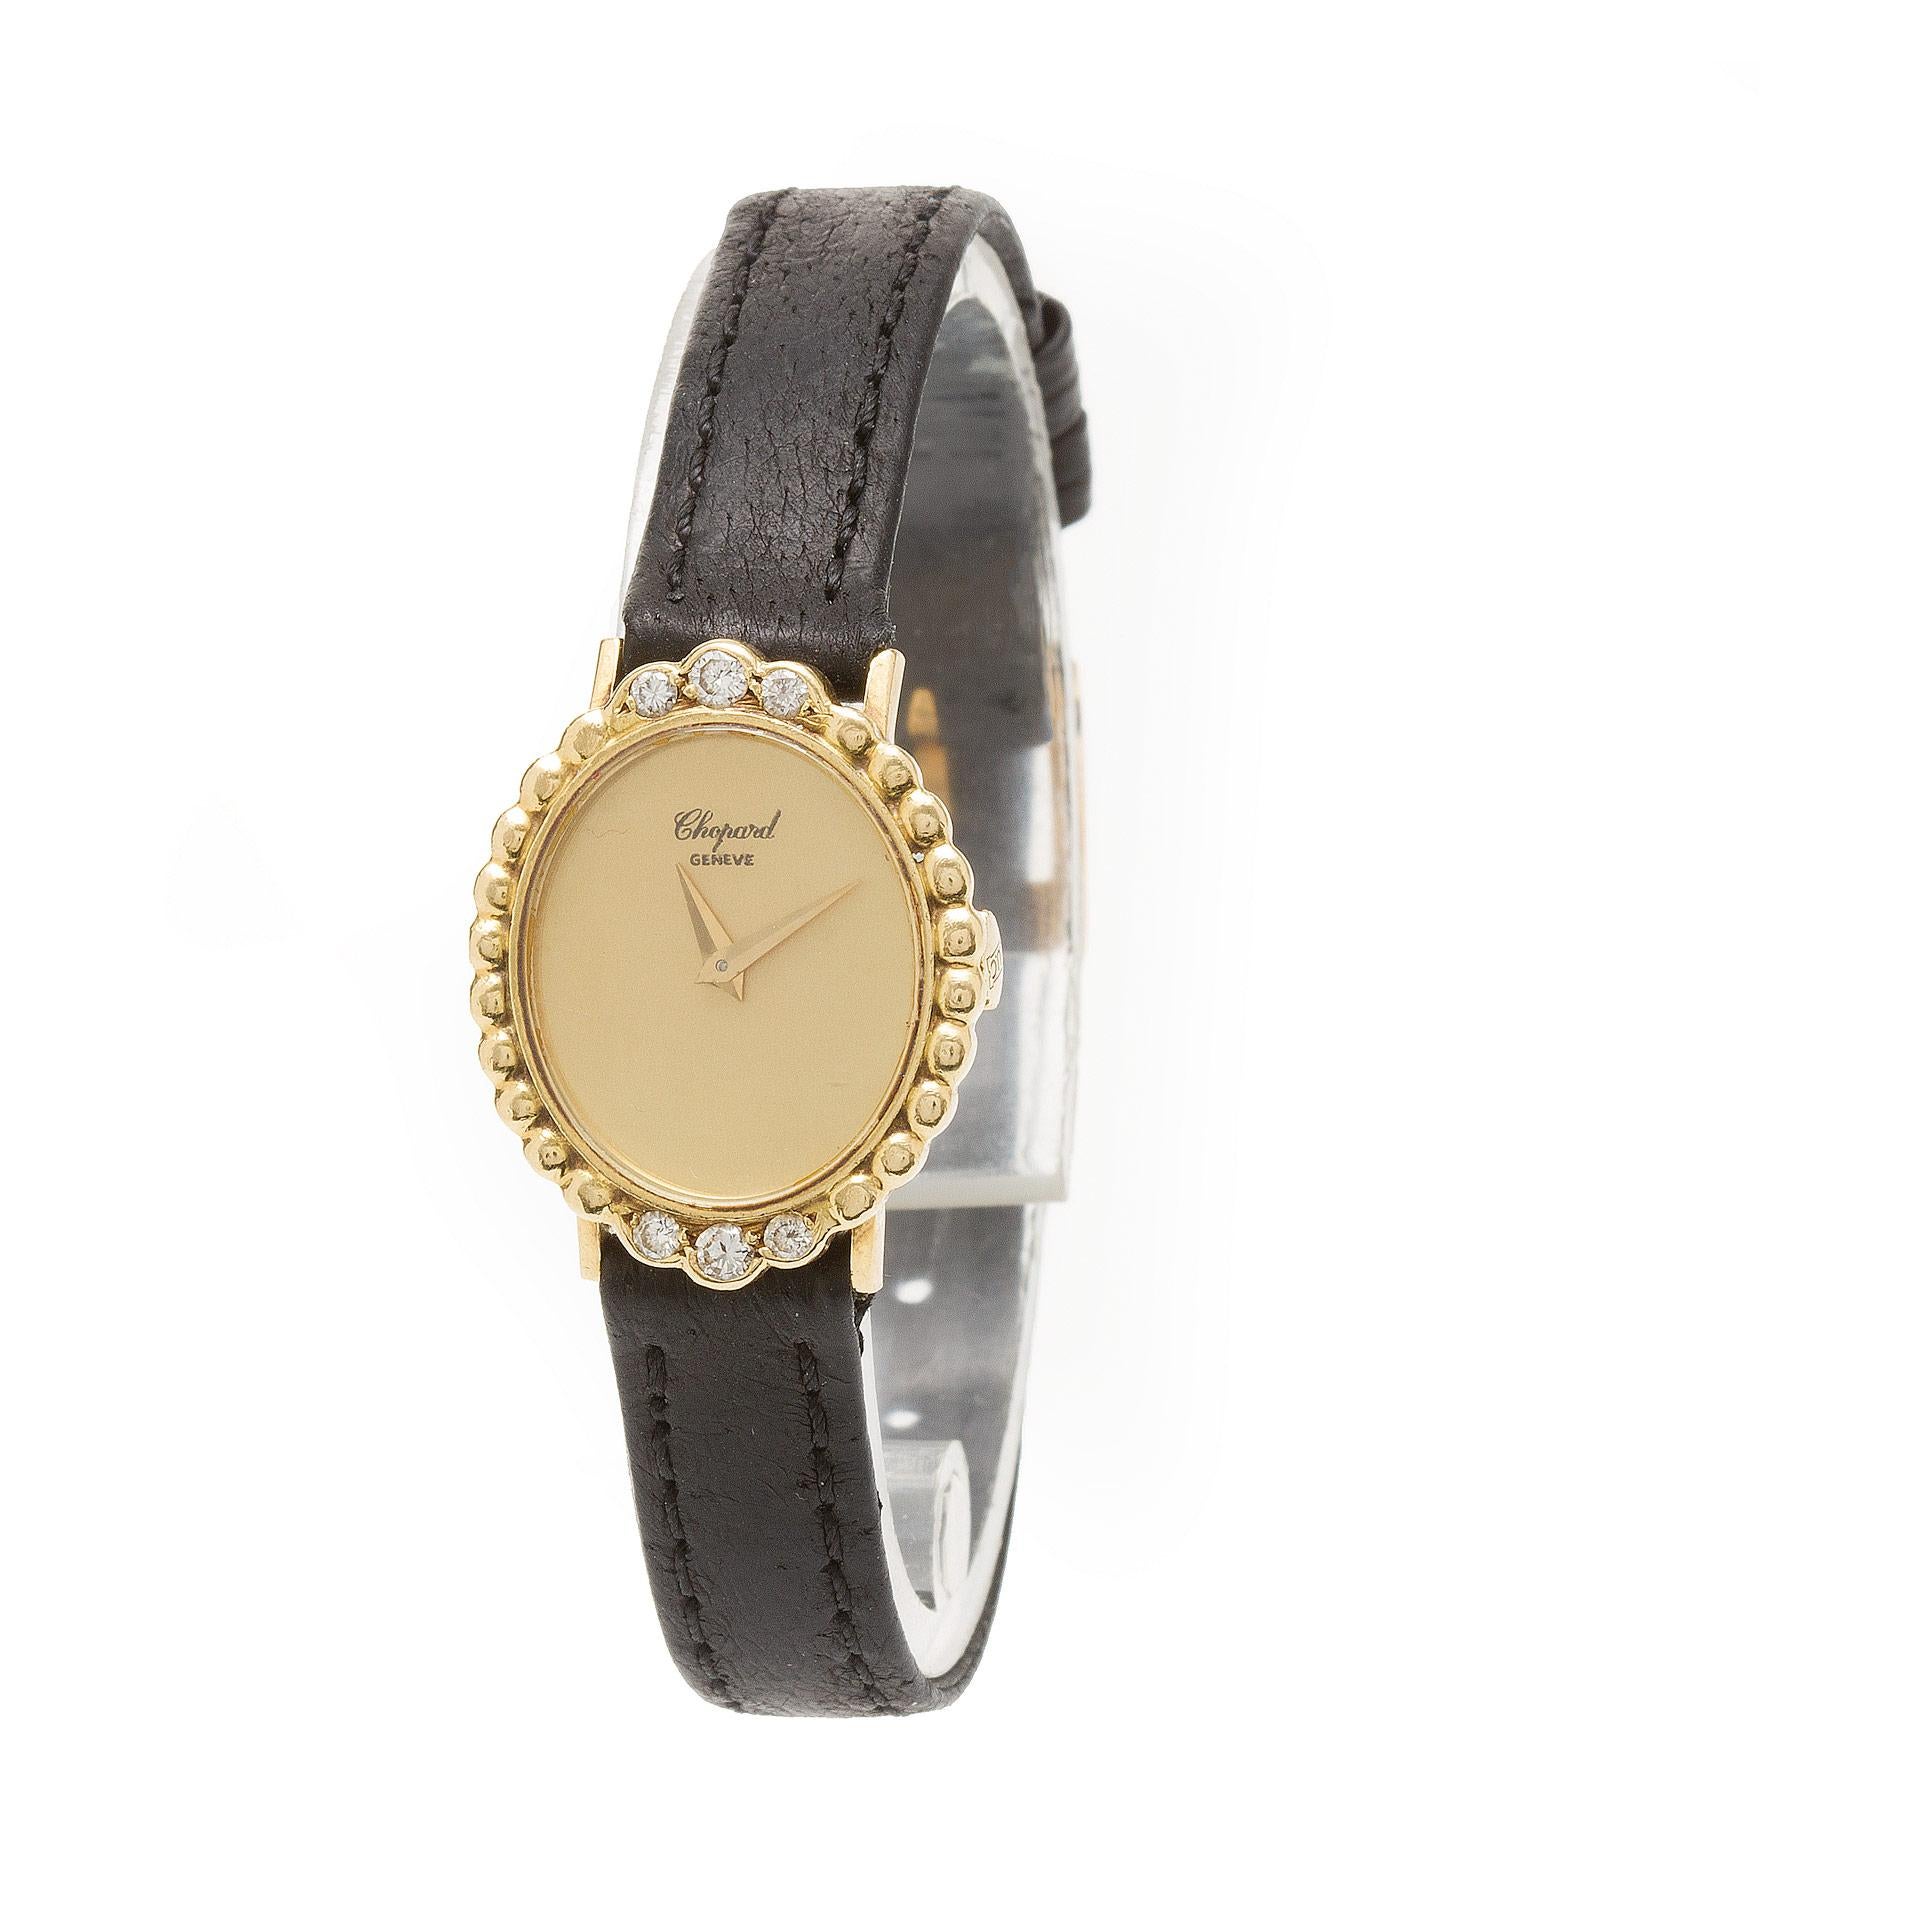 Ladies Chopard Classic Oval in 18k with diamonds accents on the bezel on leather strap. Manual. 20mm case size. Ref SG 3579 1. Circa 70s. Fine Pre-owned Chopard Watch.

Certified preowned Vintage Chopard Classic SG 3579 1 watch is made out of yellow